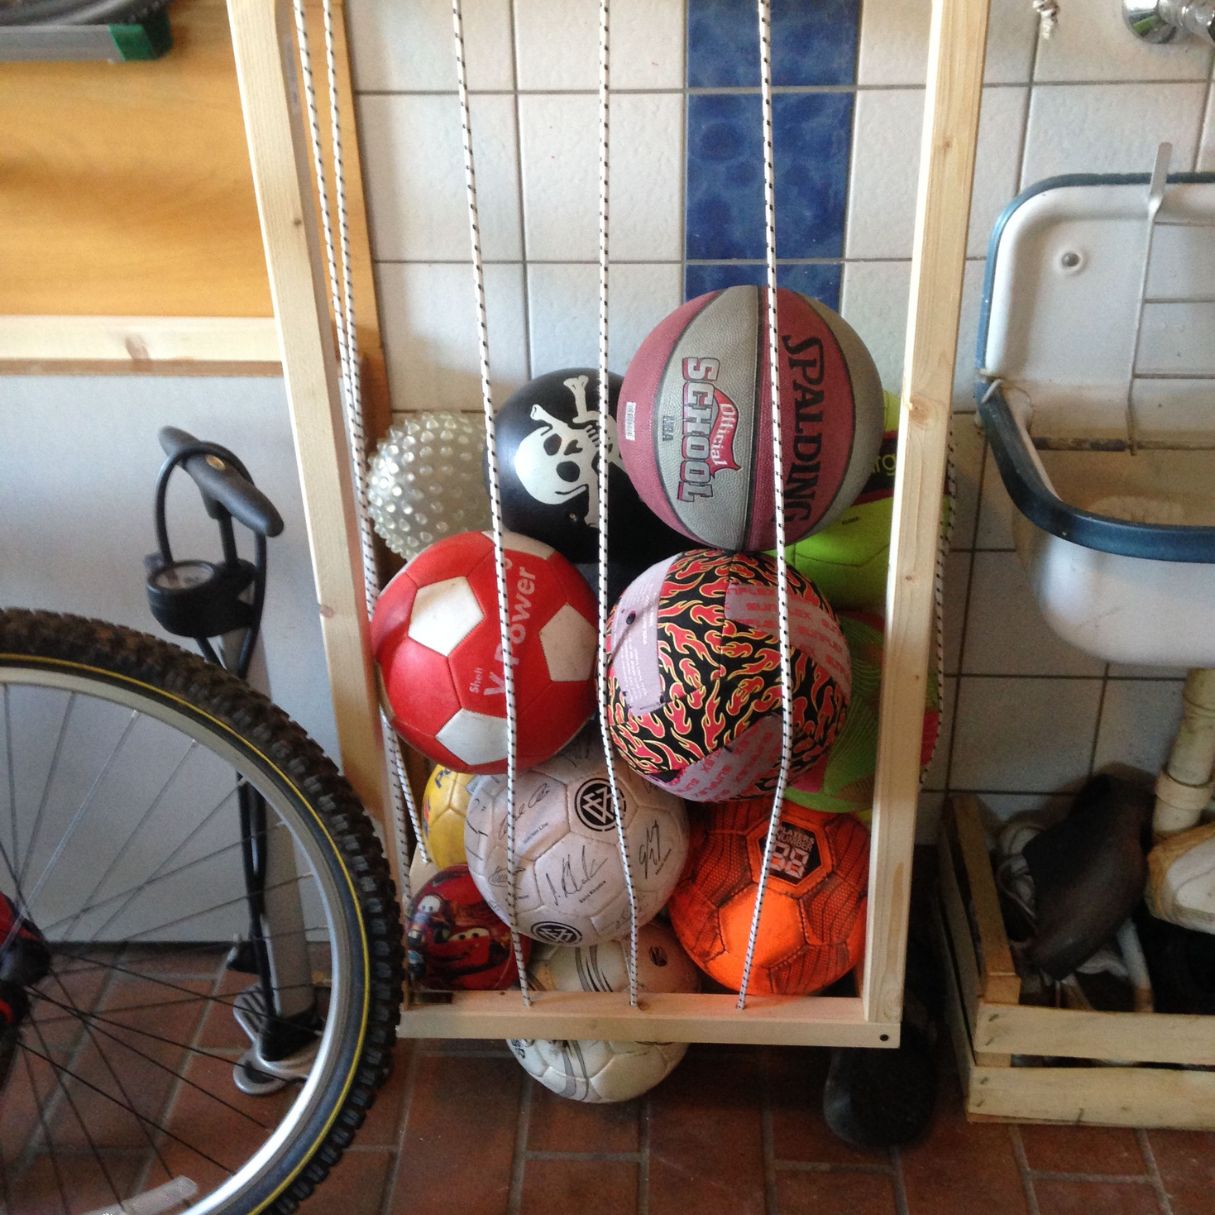 How To Store Balls In Garage